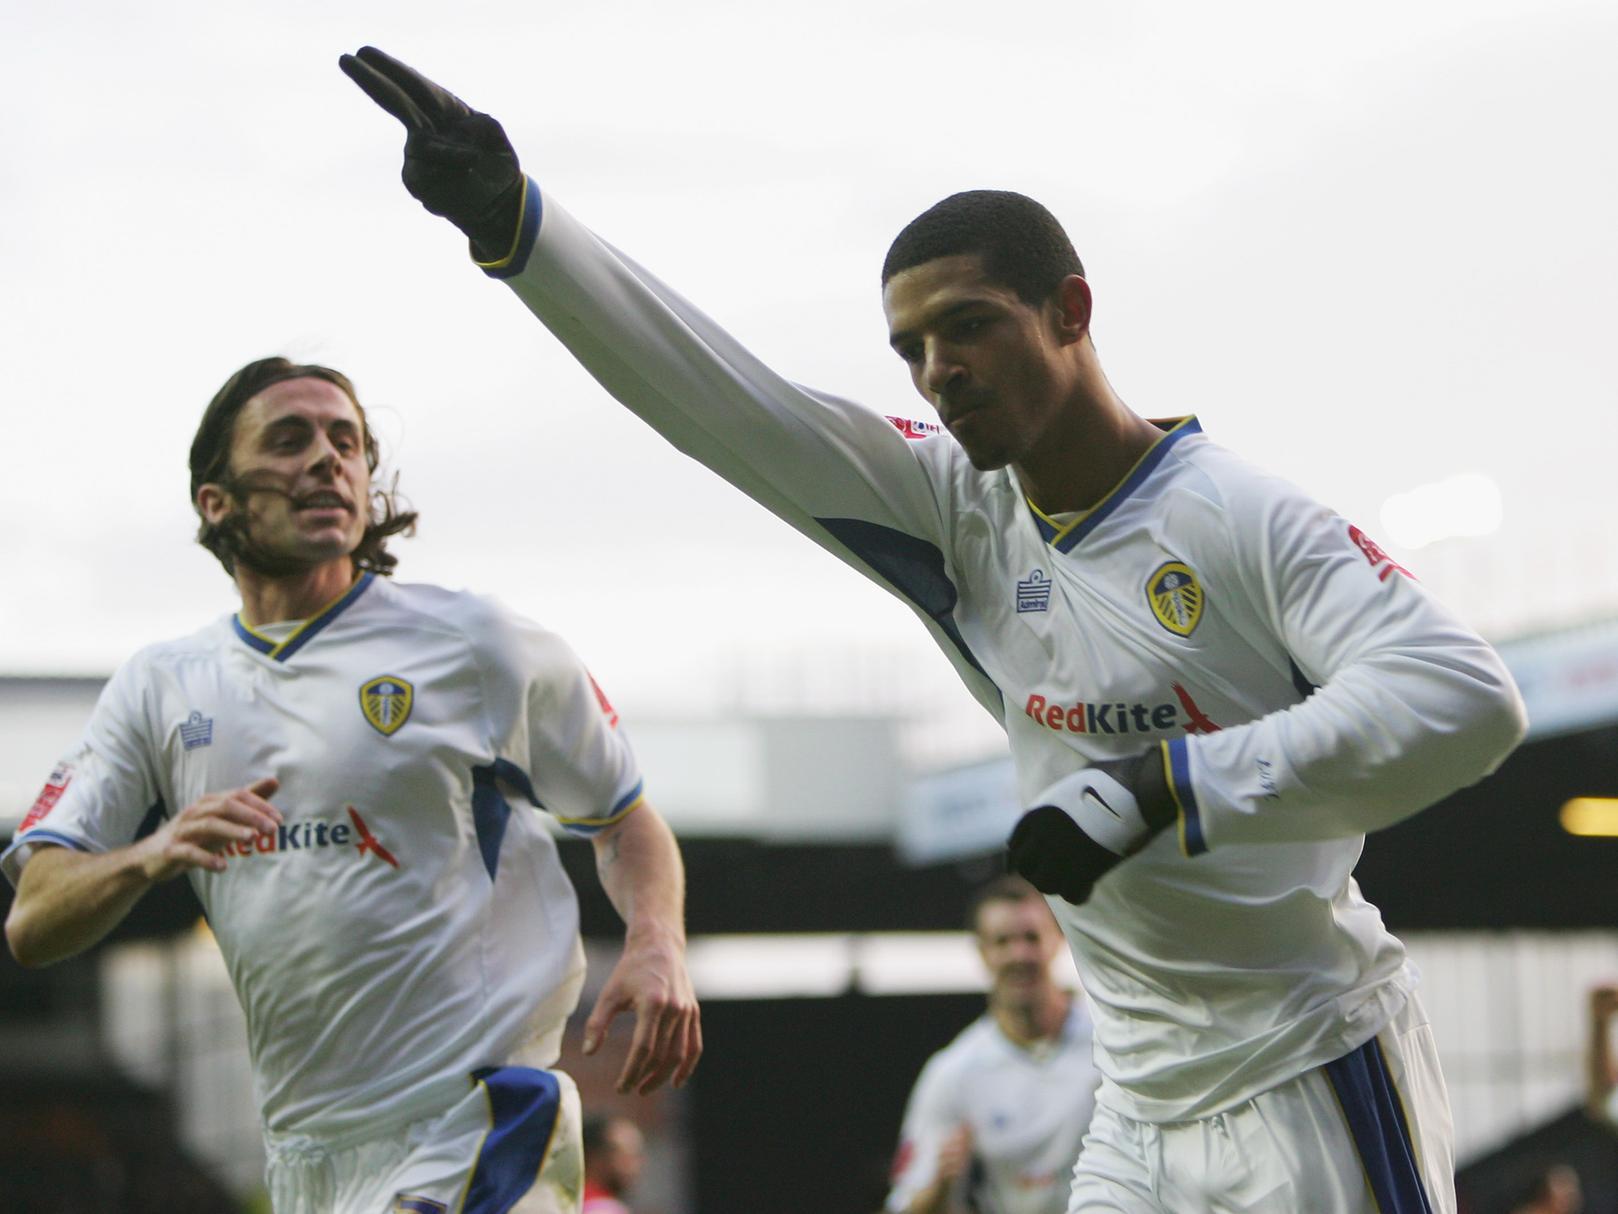 Leeds made a blistering start to life in League One despite a 15 point deduction, and continued their revival with a Jermaine Beckford brace against Huddersfield Town. The first league meeting between the two sides for 20 years, Leeds United and and the Terriers would meet several times in the following years.